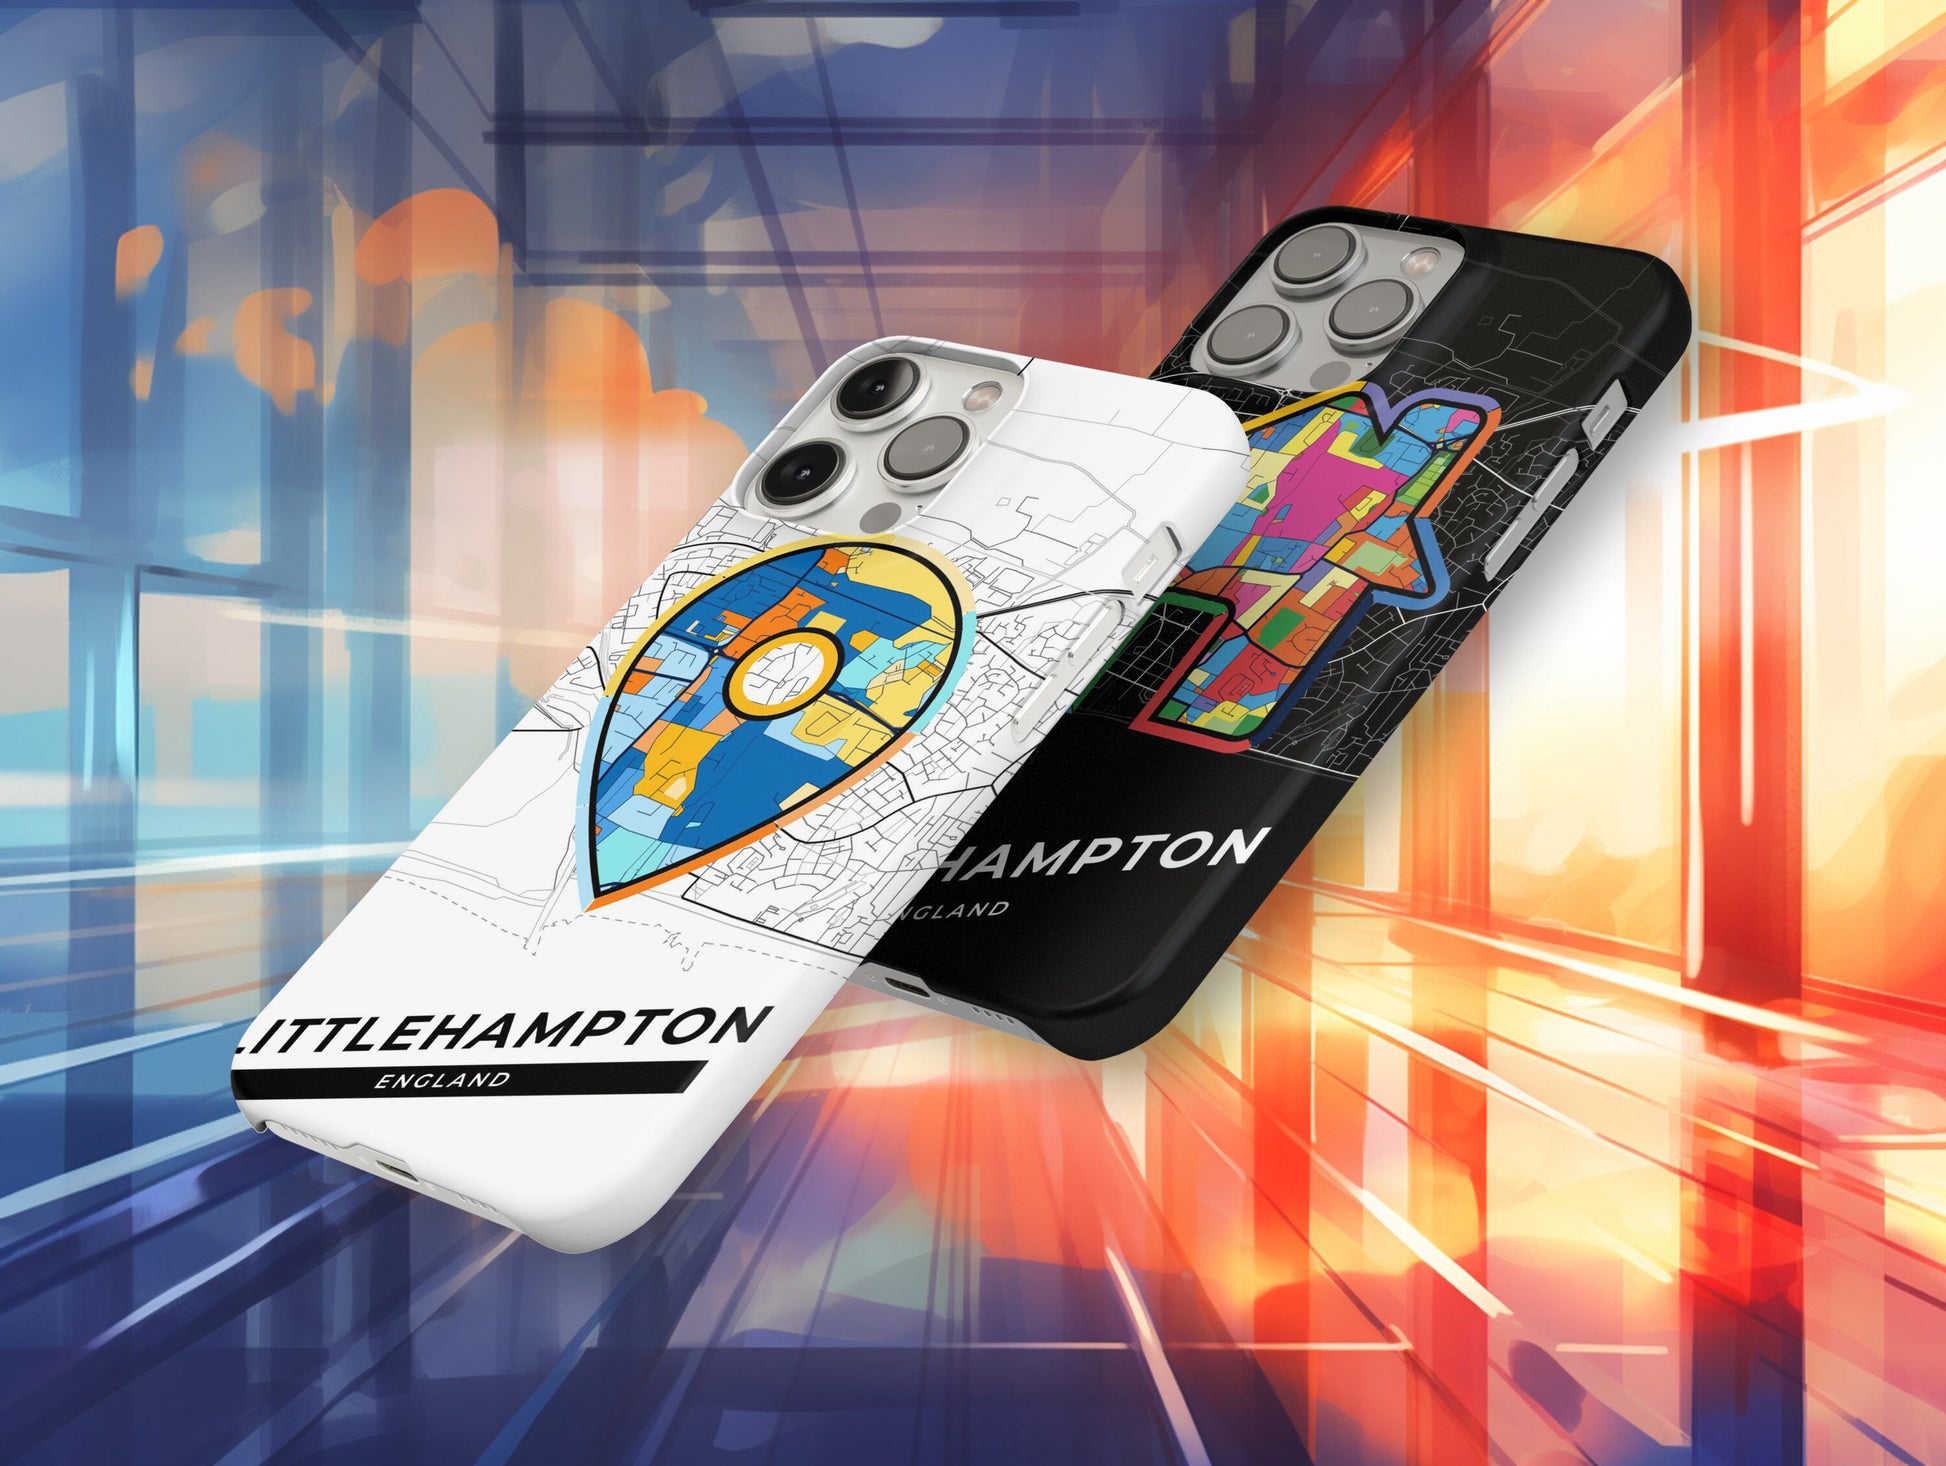 Littlehampton England slim phone case with colorful icon. Birthday, wedding or housewarming gift. Couple match cases.